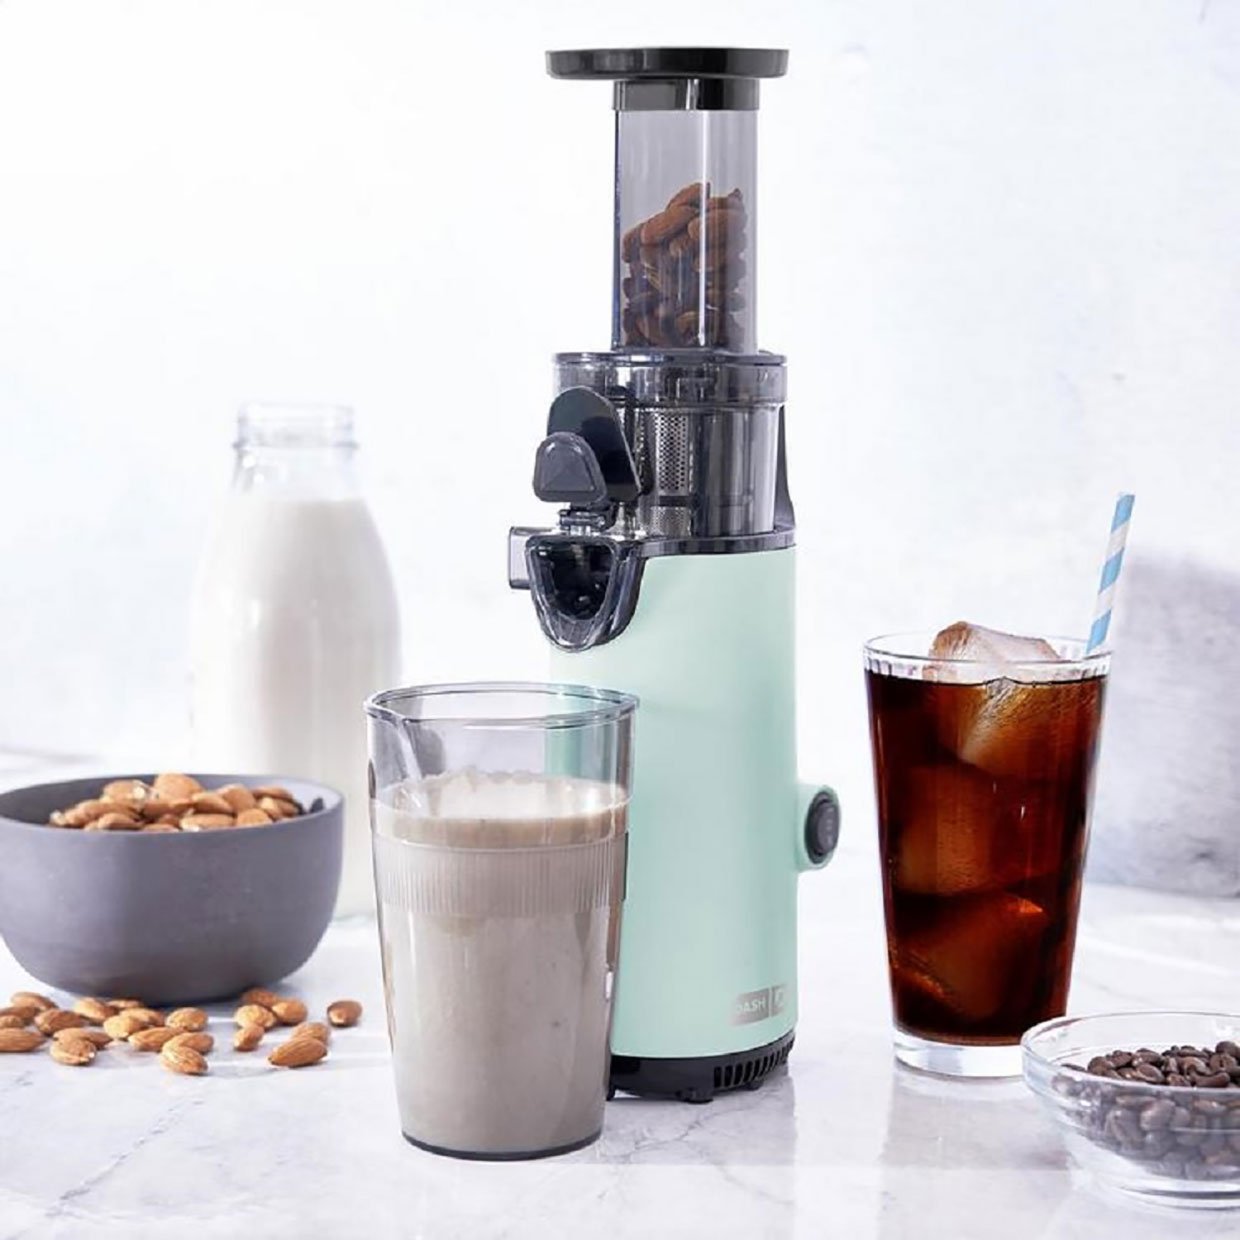 Dash Compact Cold-Press Power Juicer